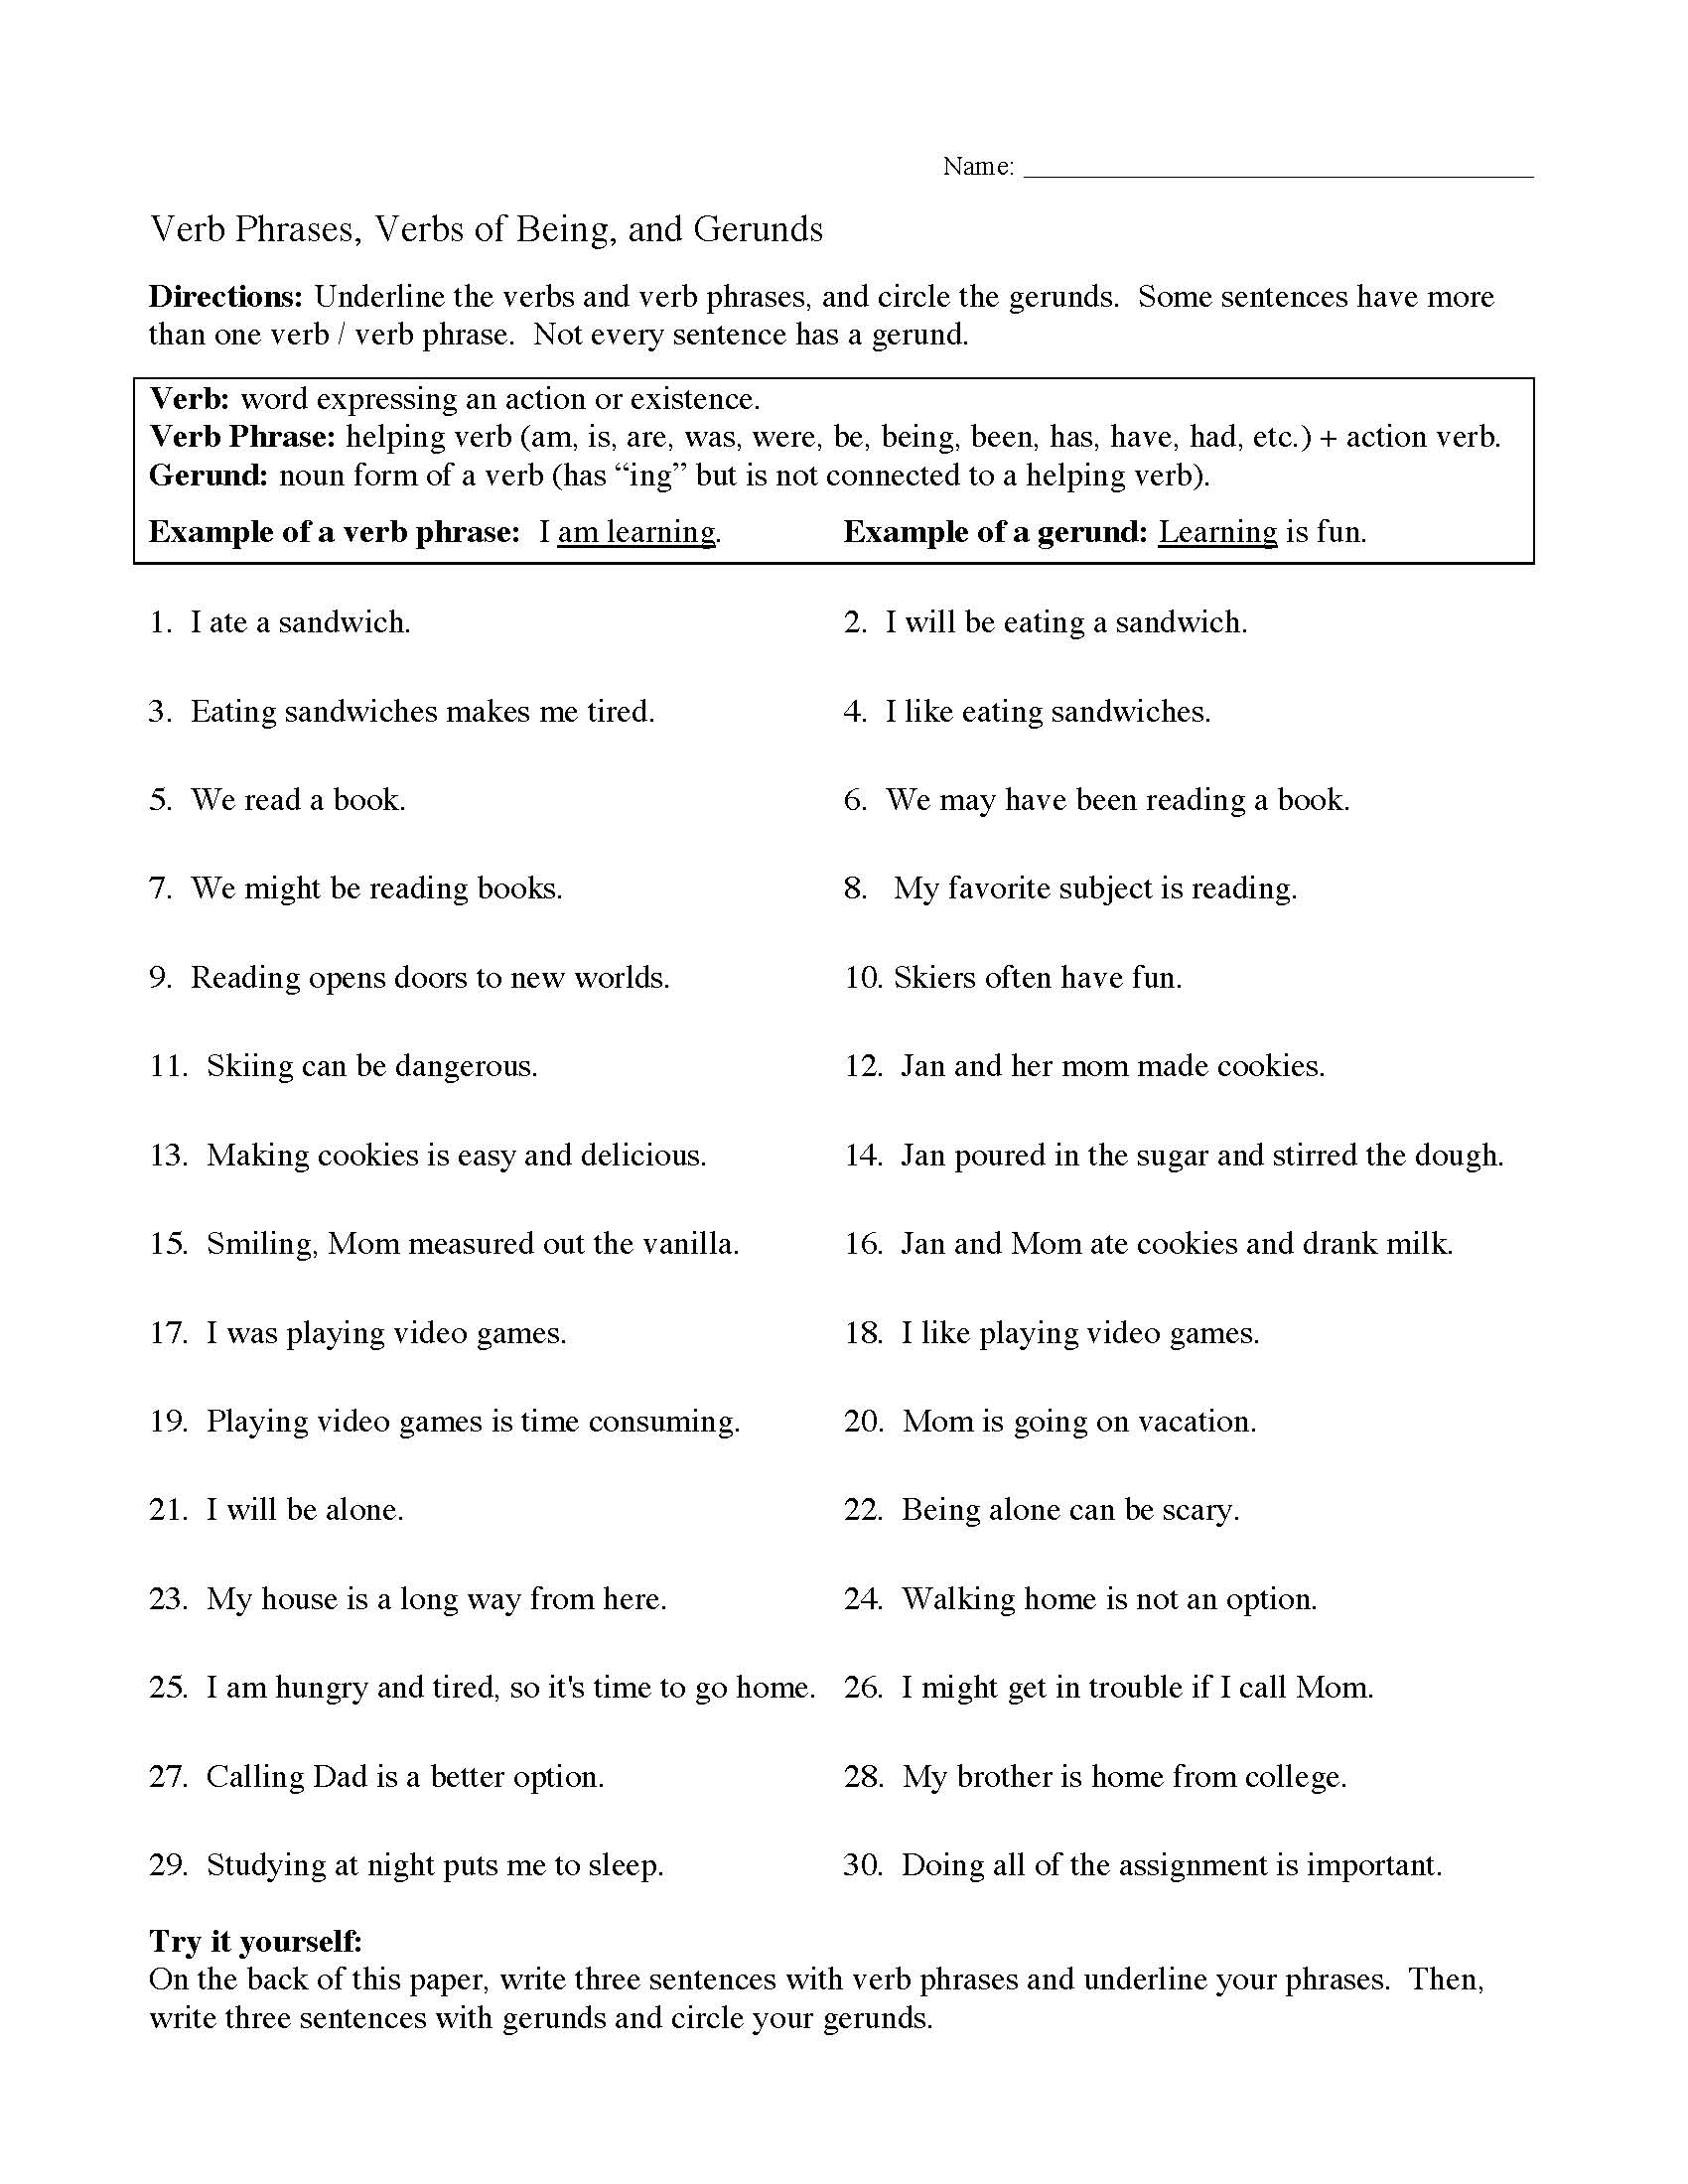 This is a preview image of the Verbs, Verbs of Being, and Gerunds Worksheet .